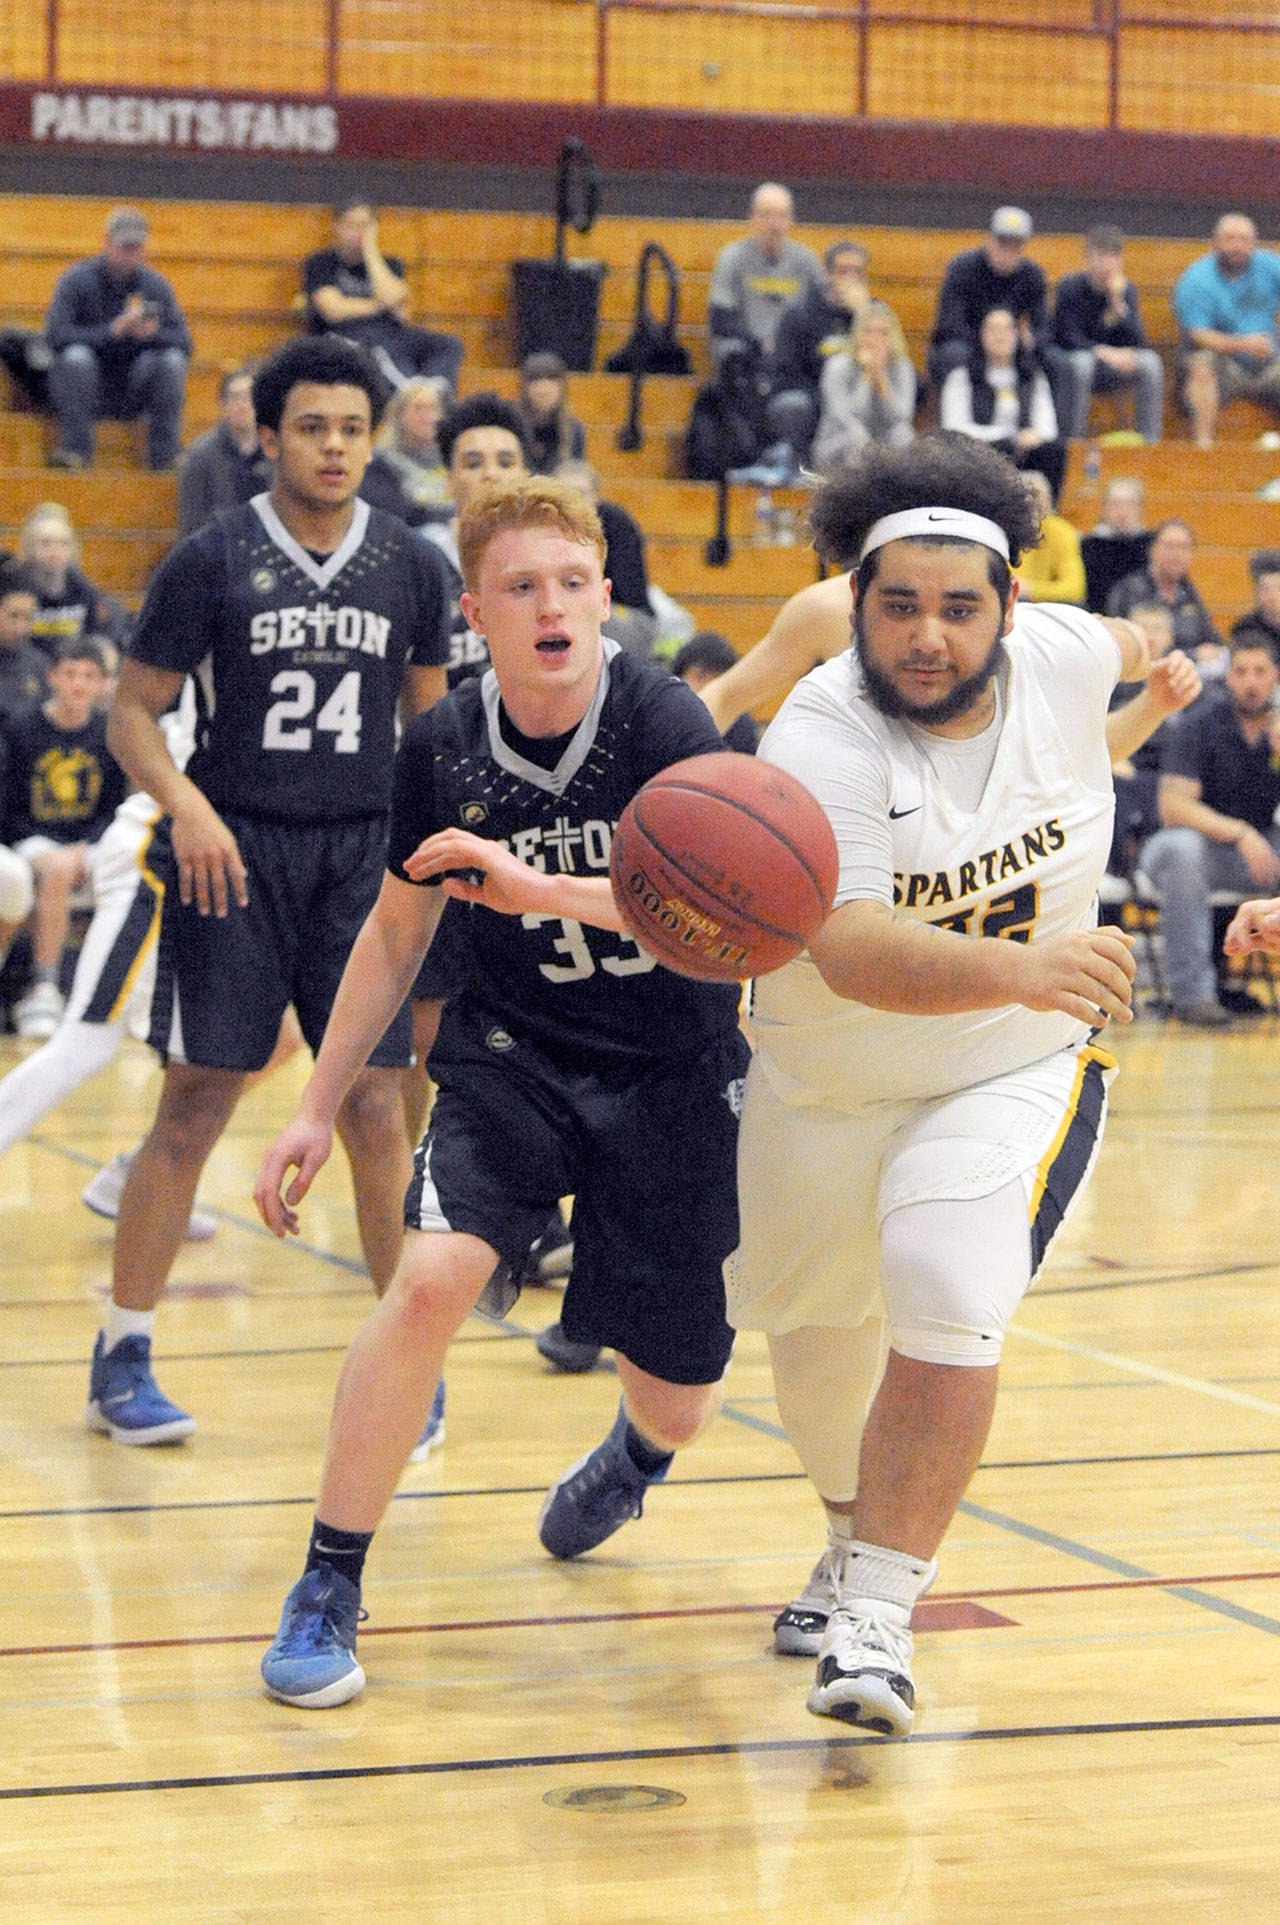 Spartan Iziah Morton (right) competes with Seton Catholic’s Andrew Olson (33) for ball control Thursday night in Chehalis during the 1A District 4 play-offs. Seton came back to defeat Forks 84 to 69 ending the Spartan’s season. Lonnie Archibald/for Peninsula Daily News